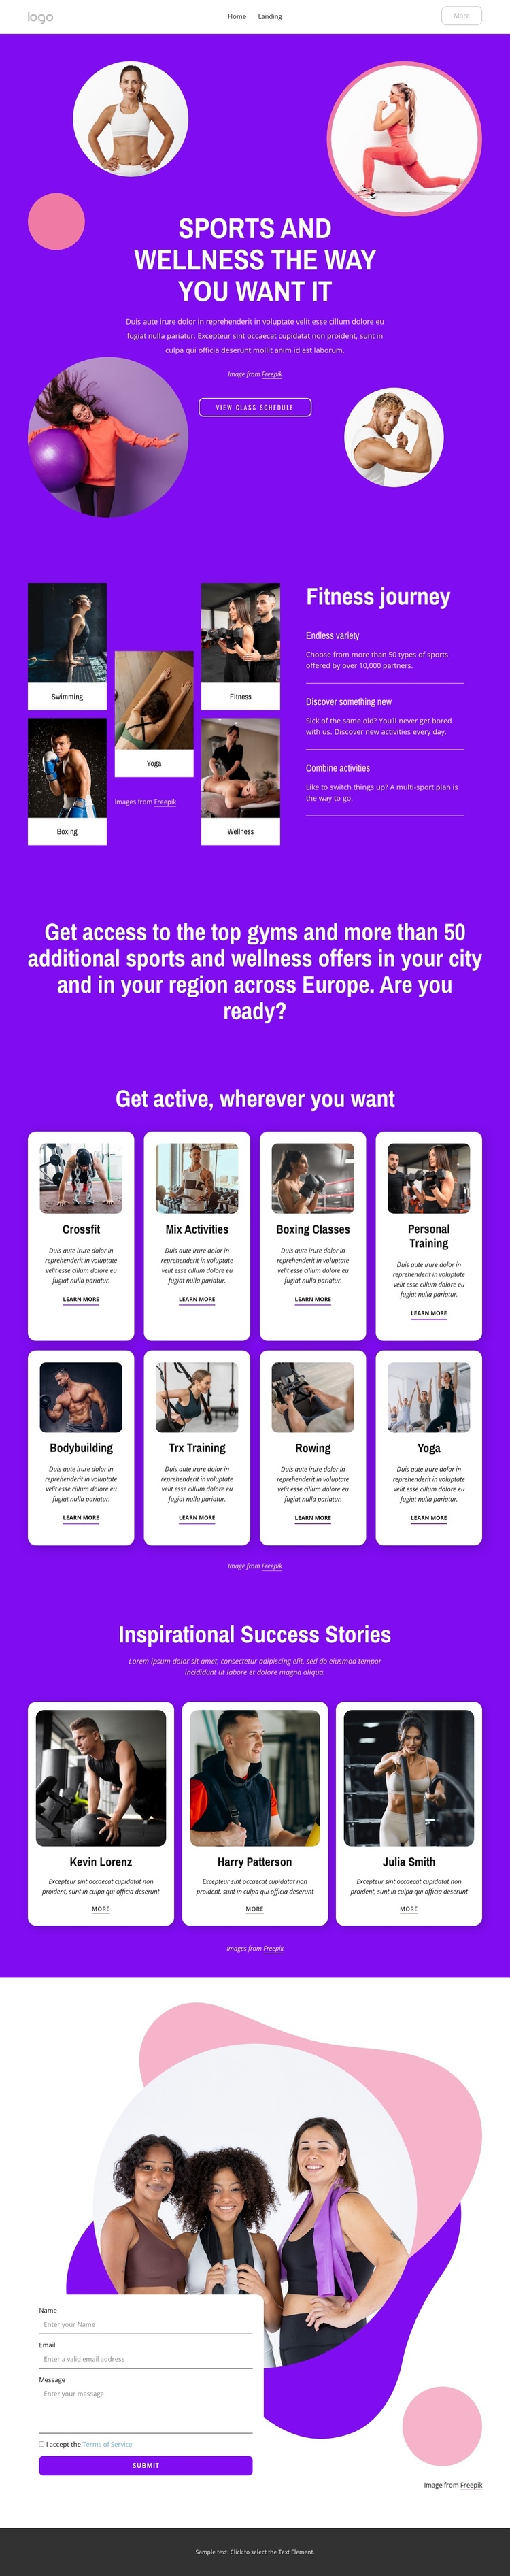 Sports and wellness the way you want it Joomla Page Builder